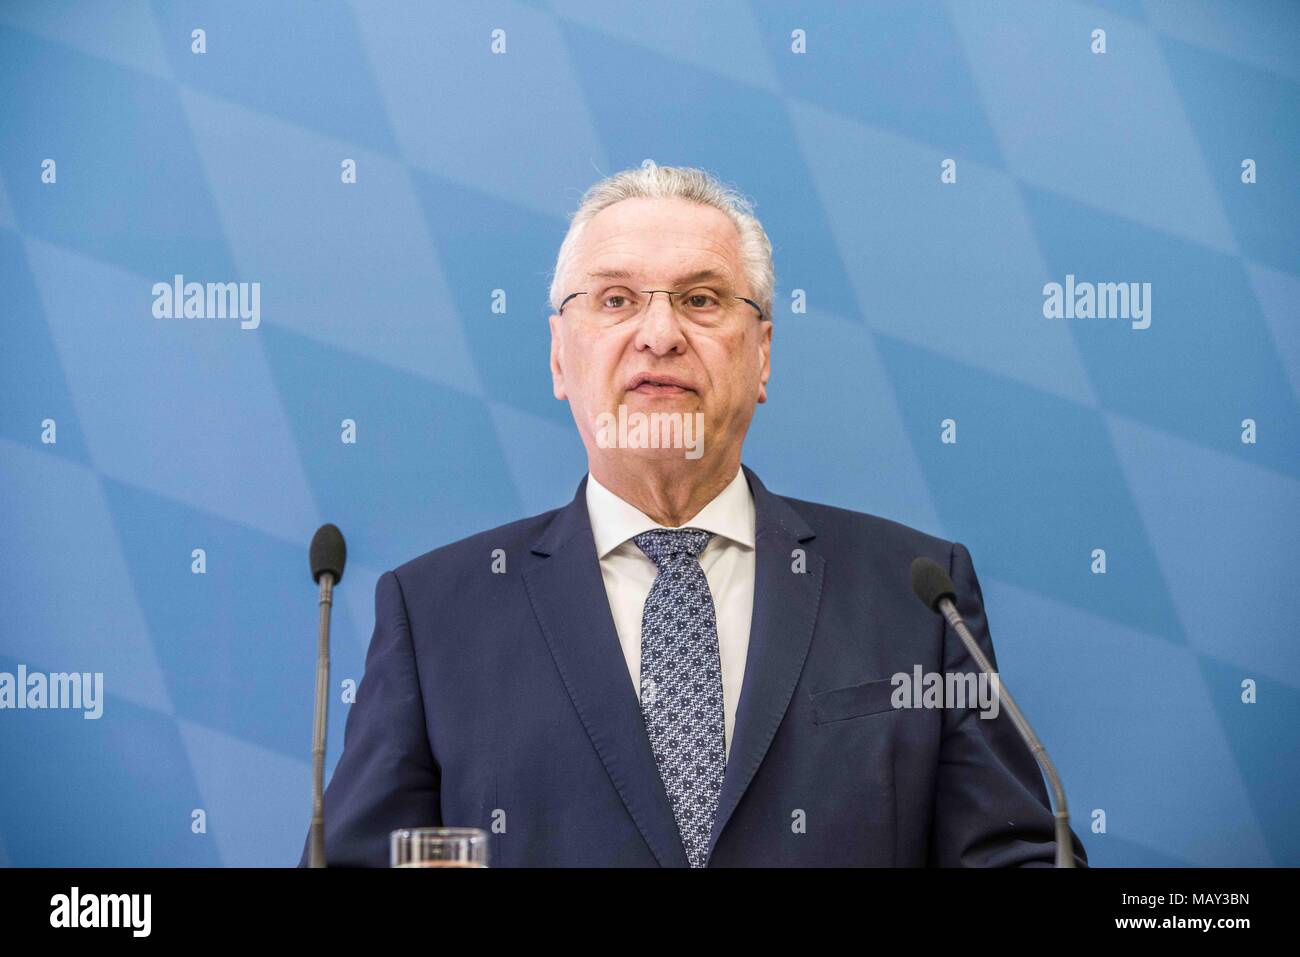 Munich, Bavaria, Germany. 5th Apr, 2018. Joachim Herrmann, Interior Minister of Bavaria. The 2017-2018 edition of the Bavarian Verfassungsschutzbericht (Office for the Protection of the Constitution, Secret Service) report was released detailing threats to the state of Bavaria, including right- and left-extremism, Islamists, as well as Cyber Warfare and Espionage. The report introduced by Bavarian Innenminister Joachim Herrmann (CSU) and Dr. Burkhard KÃ¶rner, as well as .In recent years, Bavaria has seen a sharp rise in what is known as PMK-Rechts (politically motivated crimes- right wing) Stock Photo